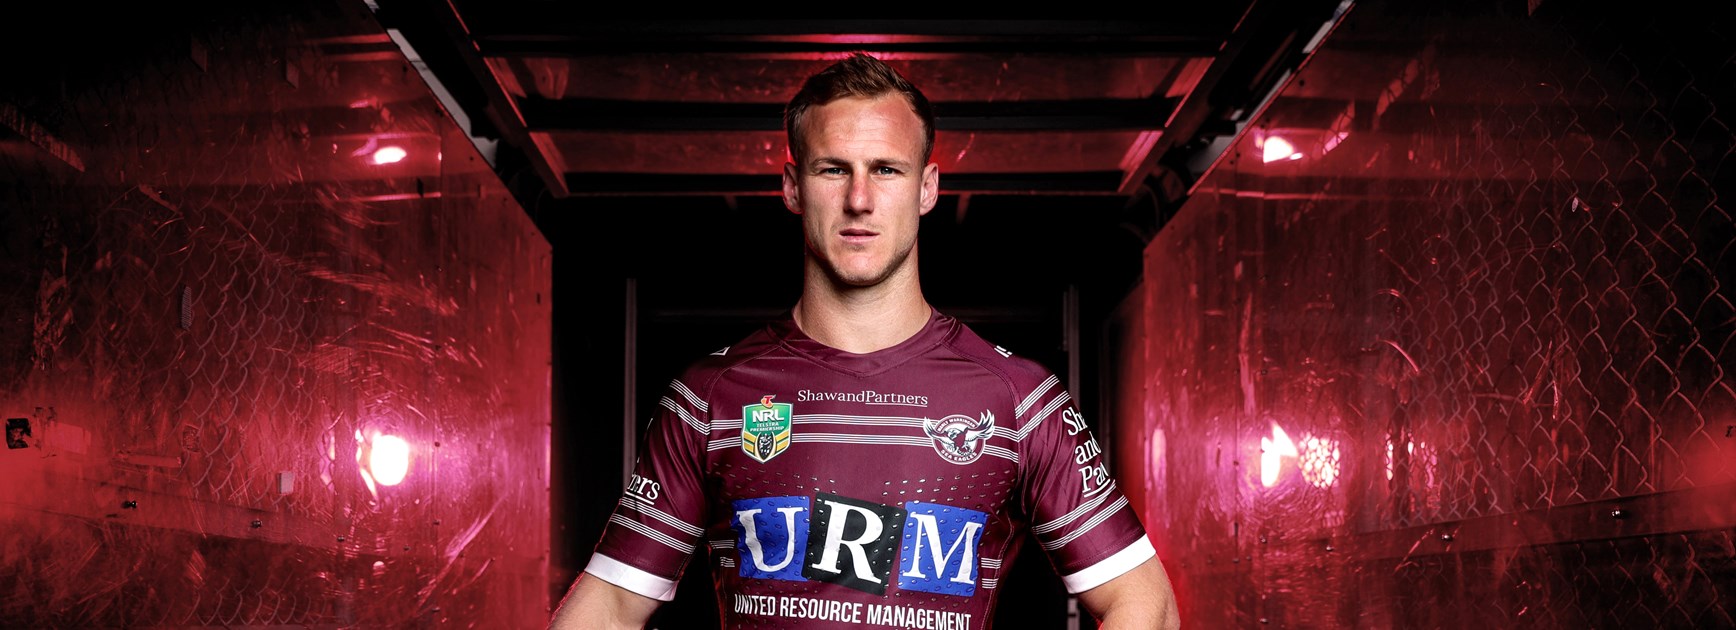 Manly Sea Eagles captain Daly Cherry-Evans.